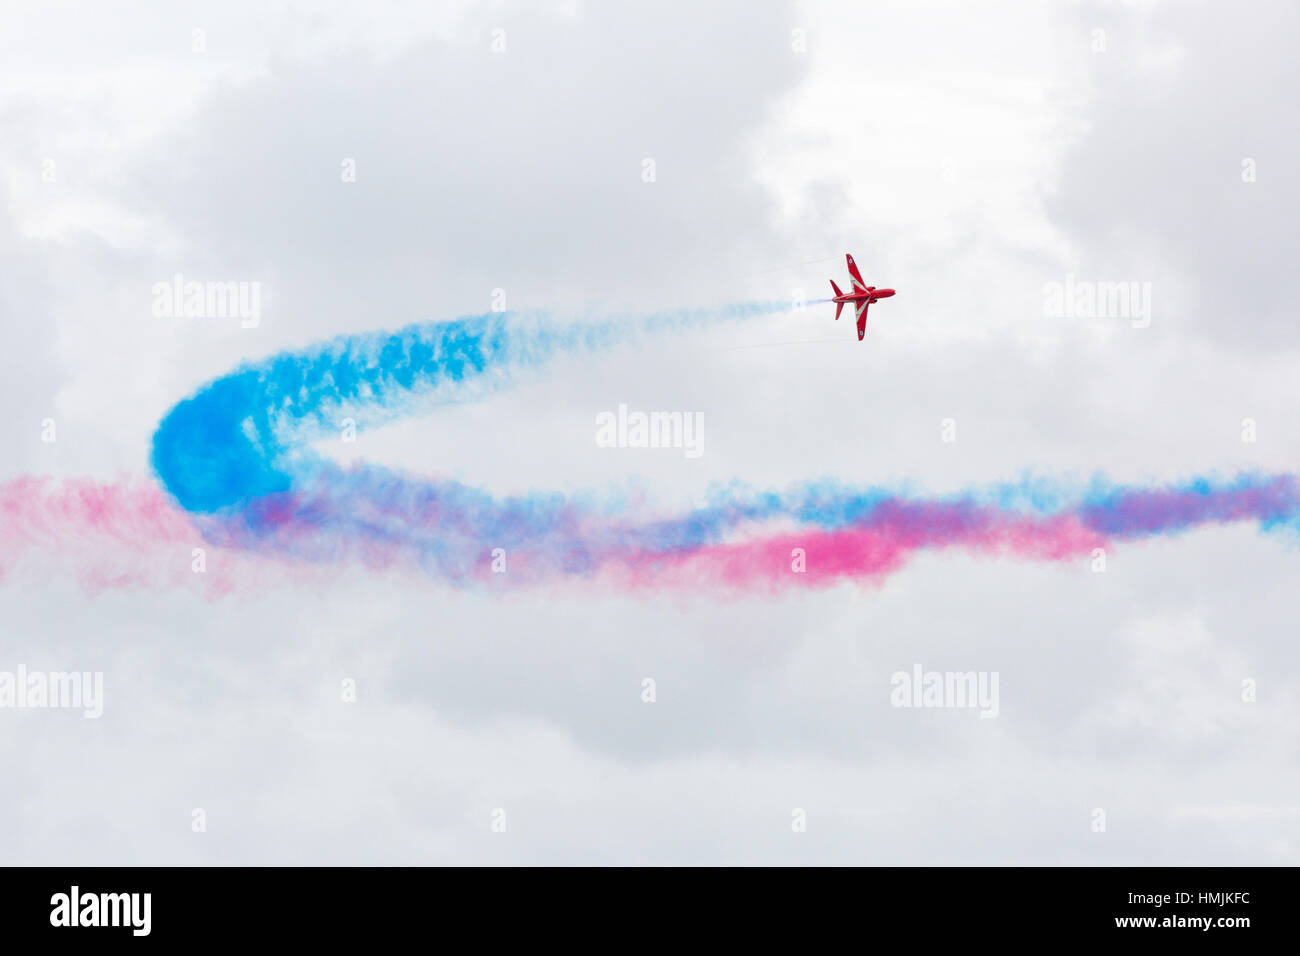 Bournemouth, Dorset, ENGLAND - August 21, 2016: Bournemouth Air Festival 2016 - One Hawk T Red Arrow jet perform aerobatics and mid air stunts across  Stock Photo